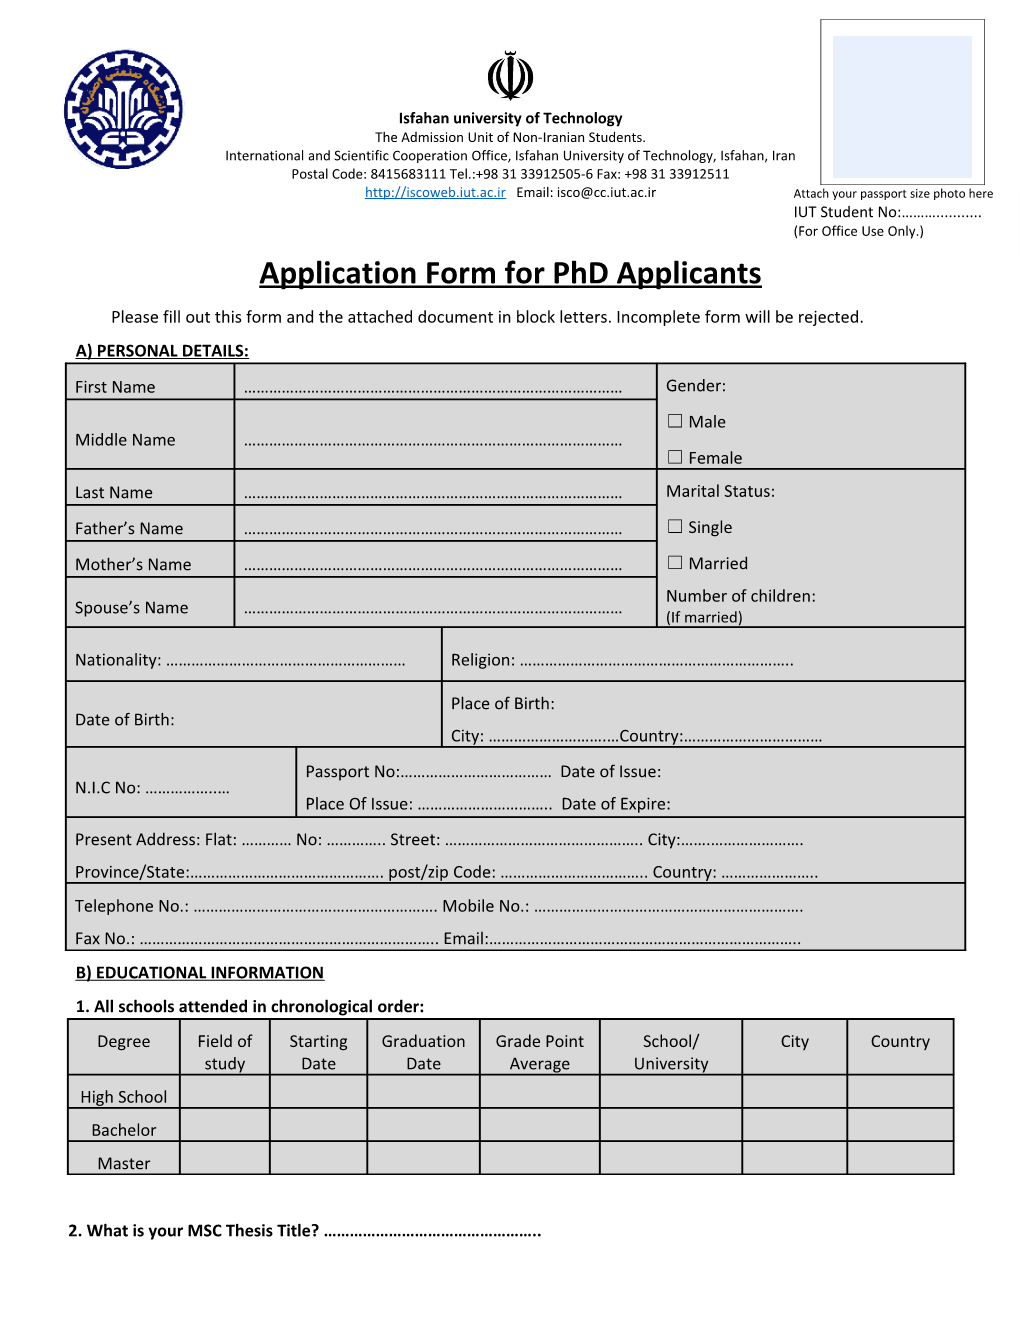 Application Form for Phd Applicants